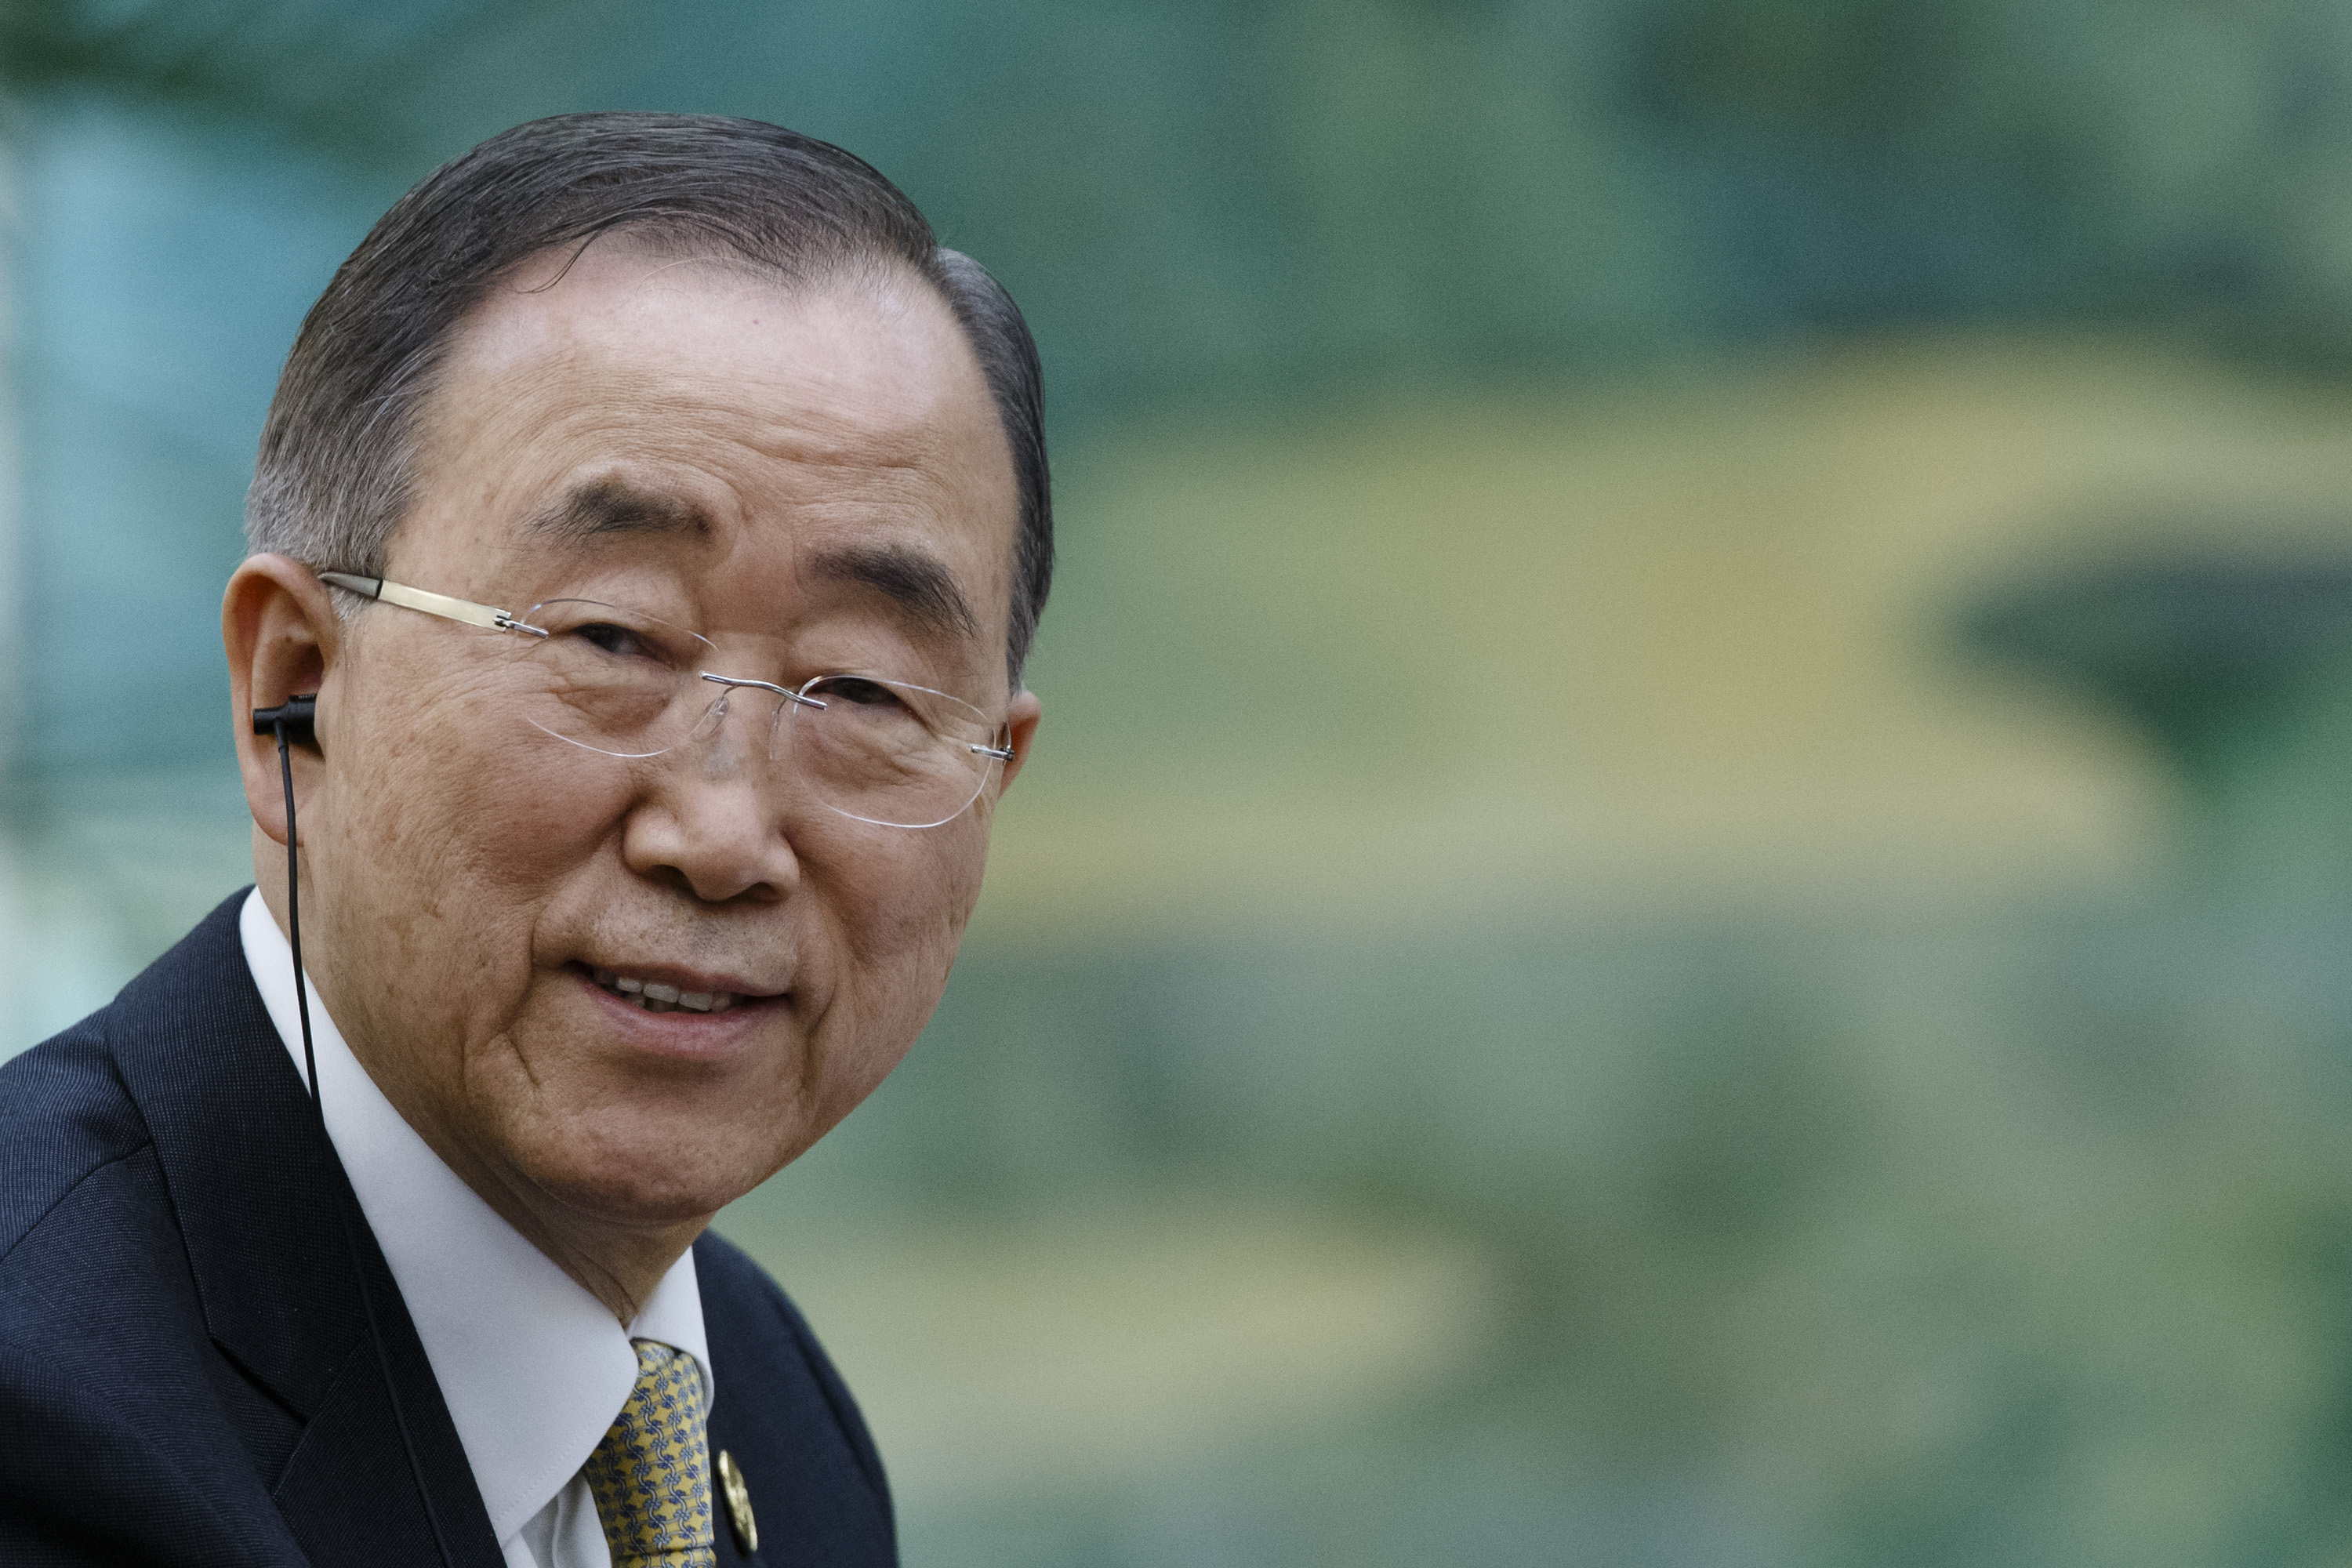 Former UN Secretary-General Ban Ki-Moon pictured at a meeting in Beijing, China.